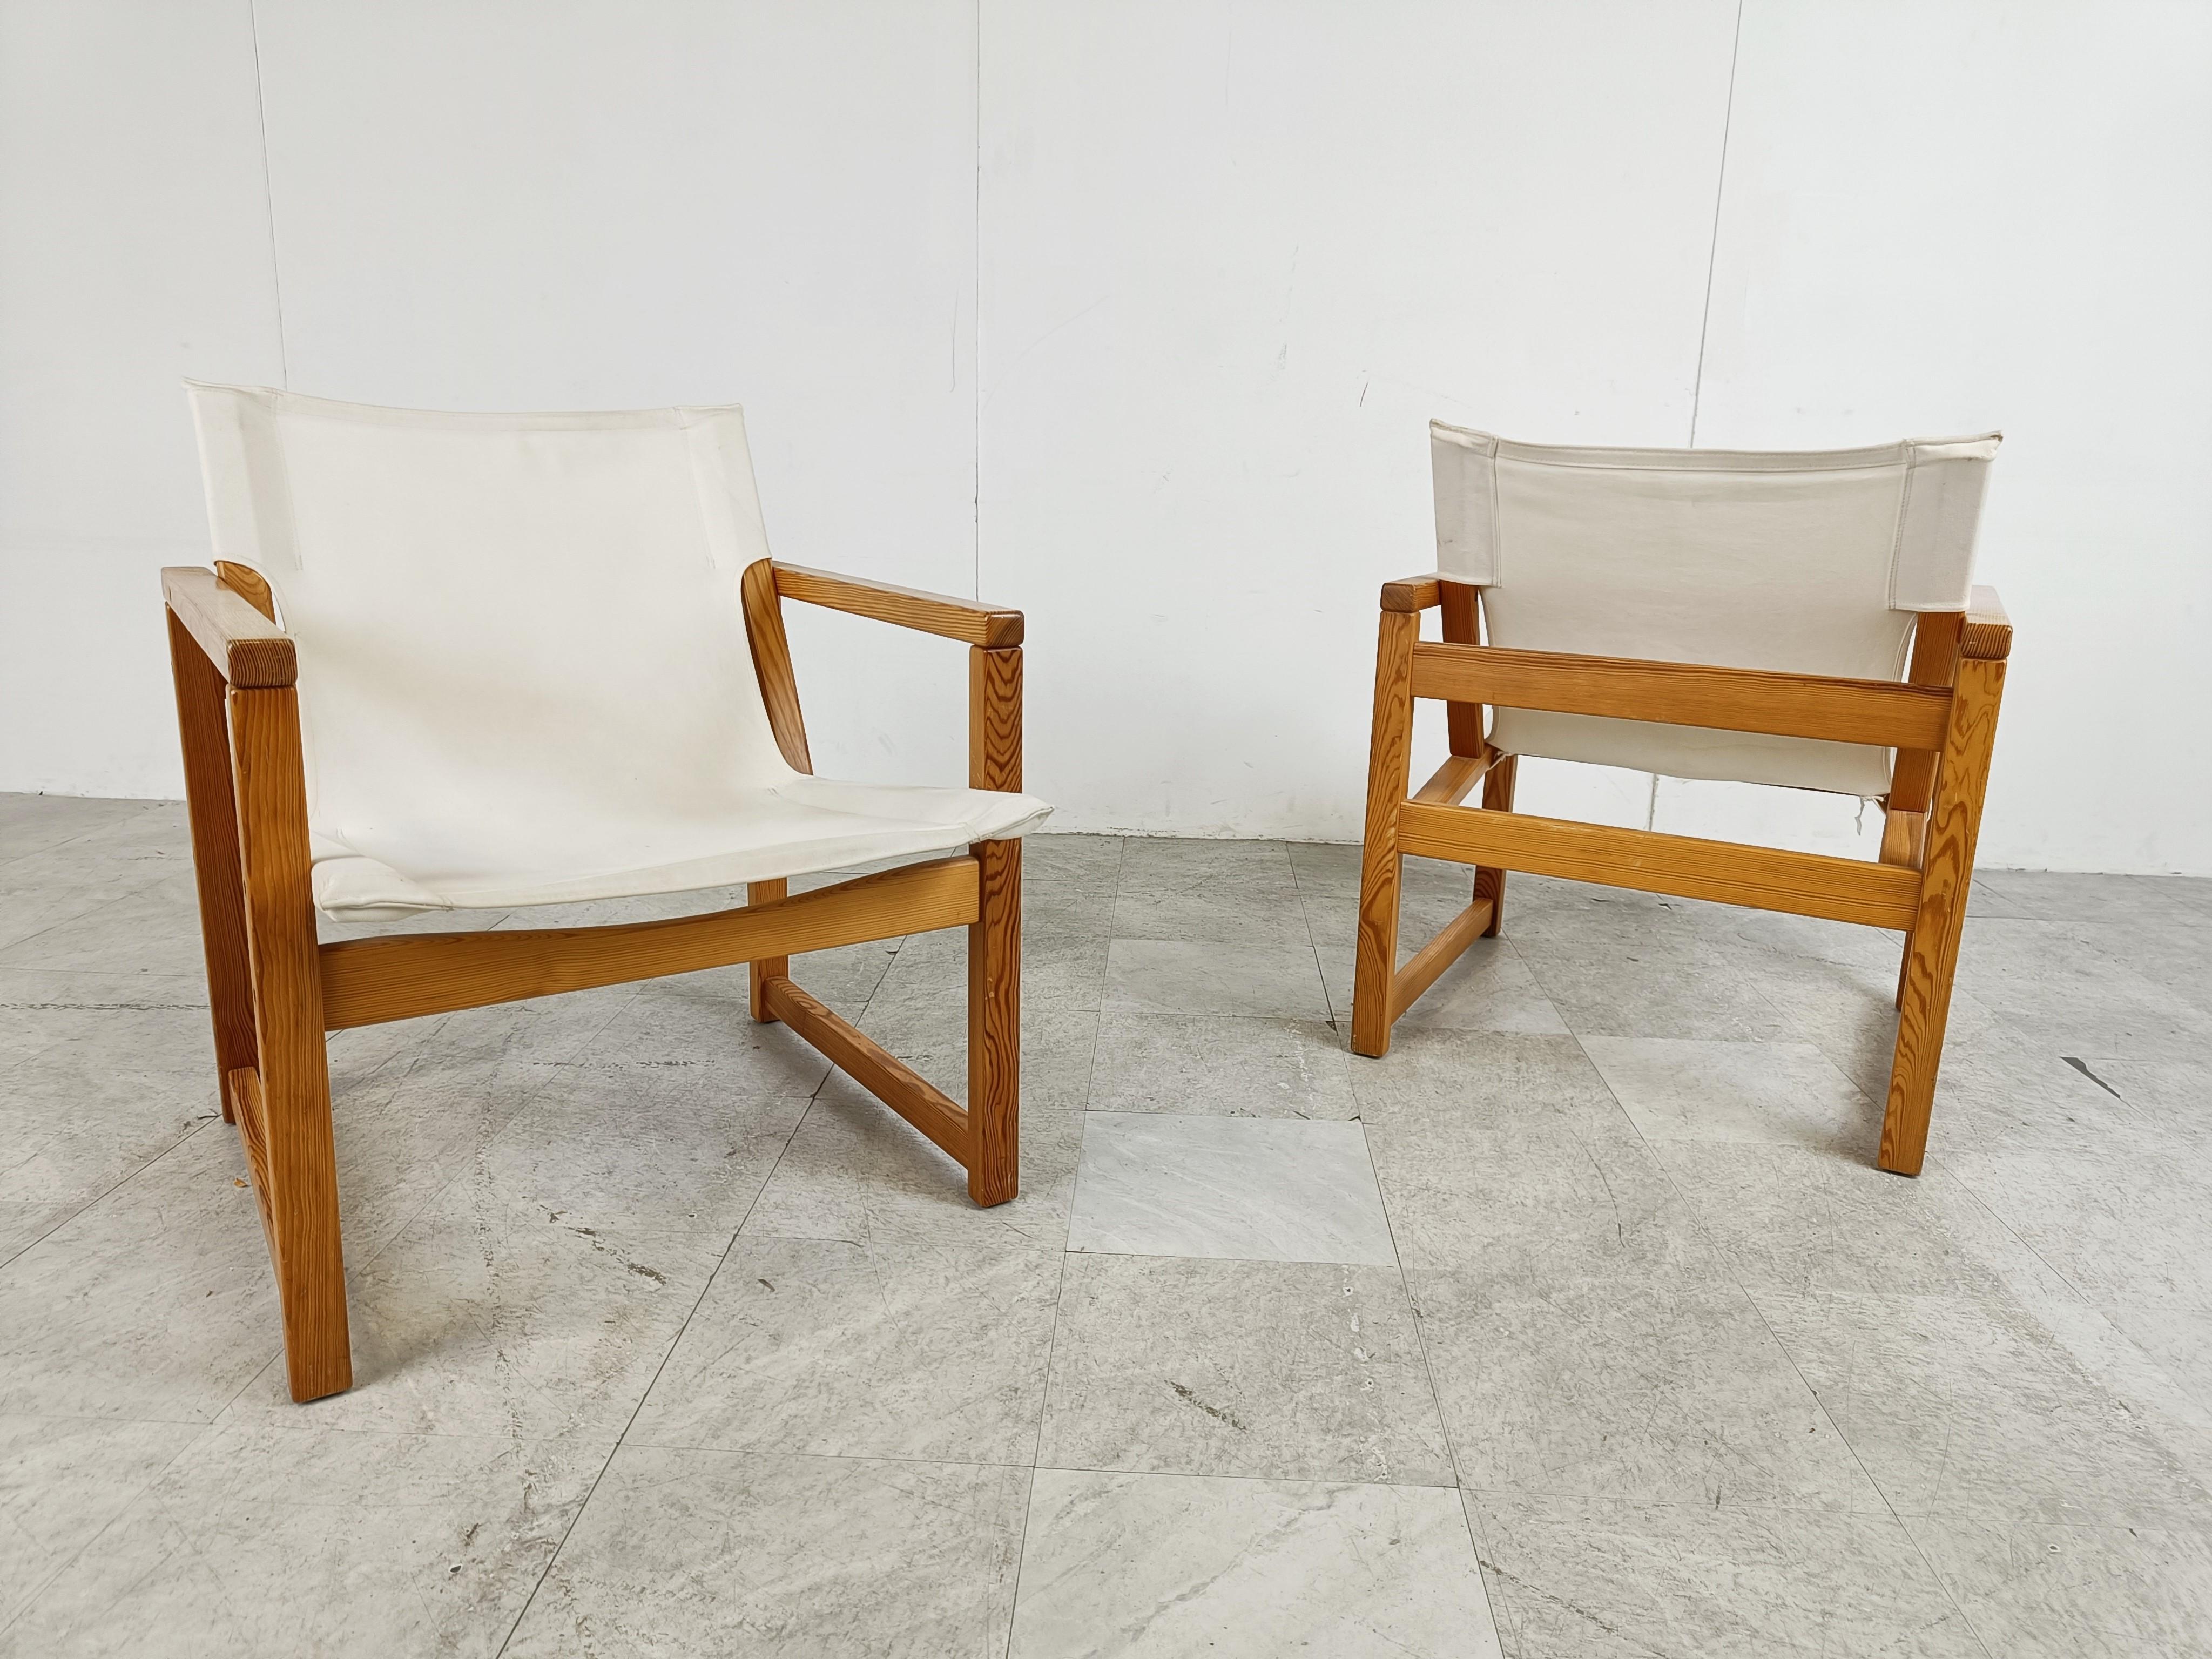 Vintage Safari Chairs by Tord Bjorlund for Ikea, 1980s 2